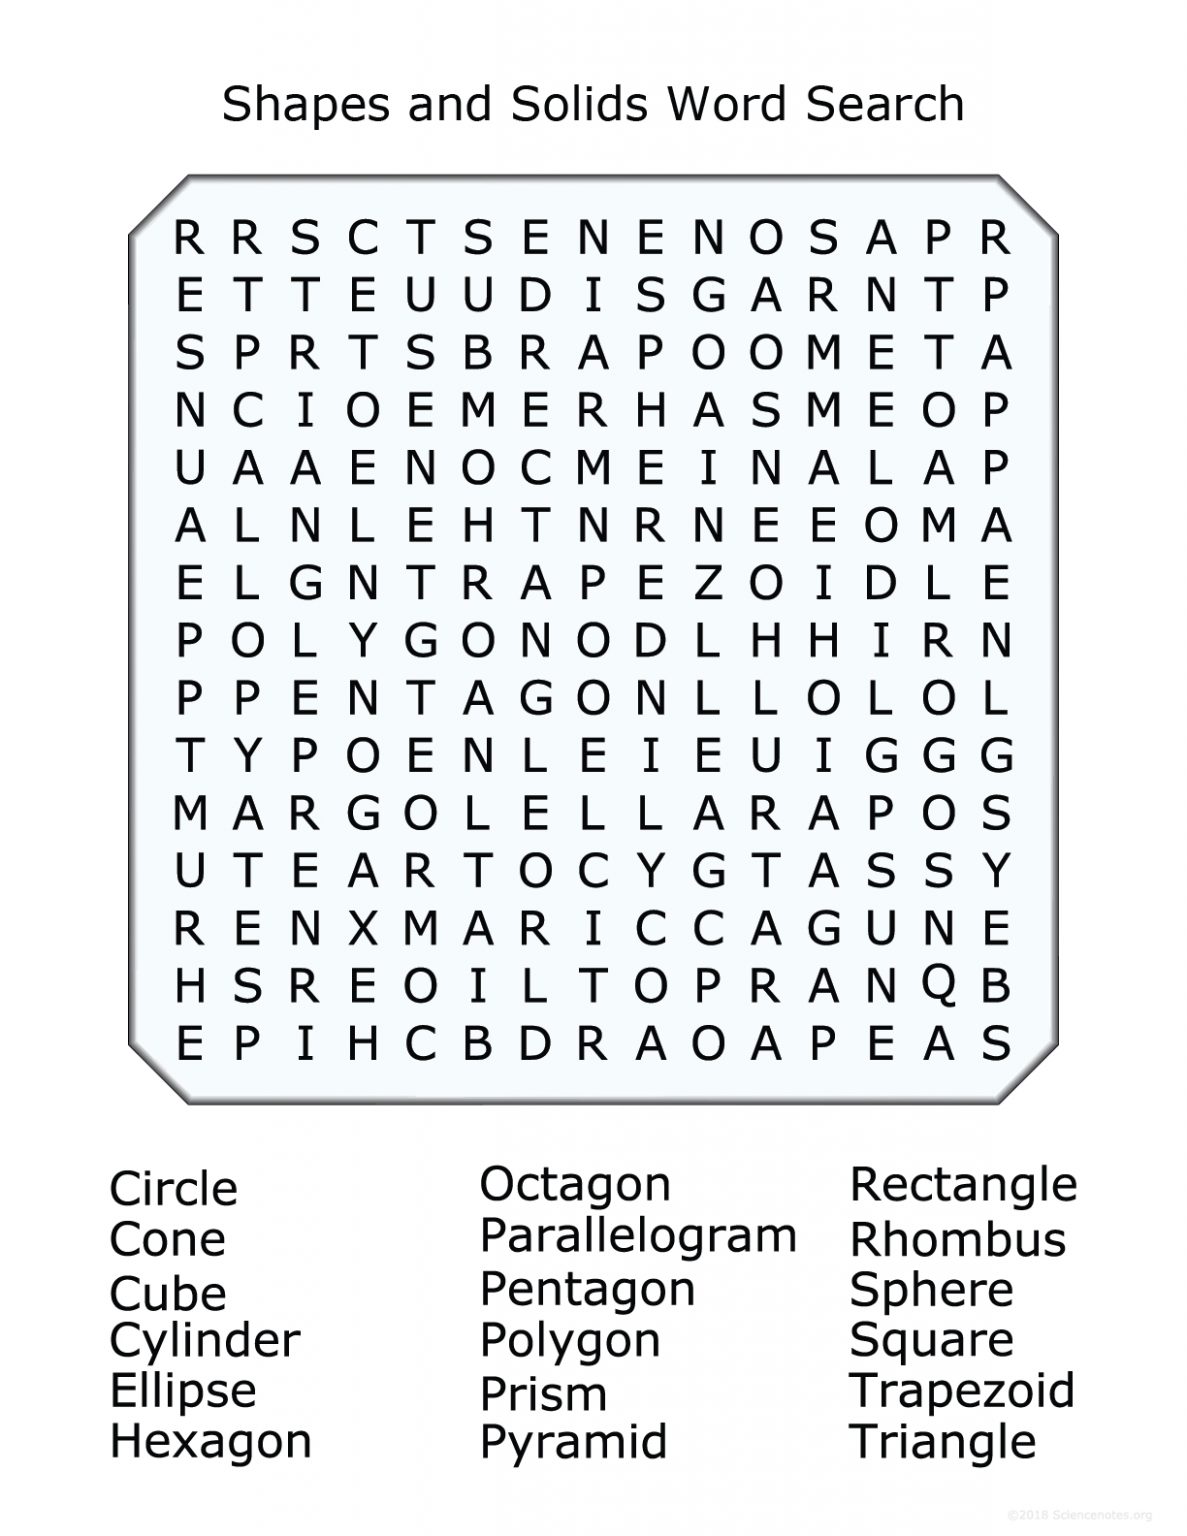 2d-and-3d-shapes-word-search-puzzle-word-search-printable